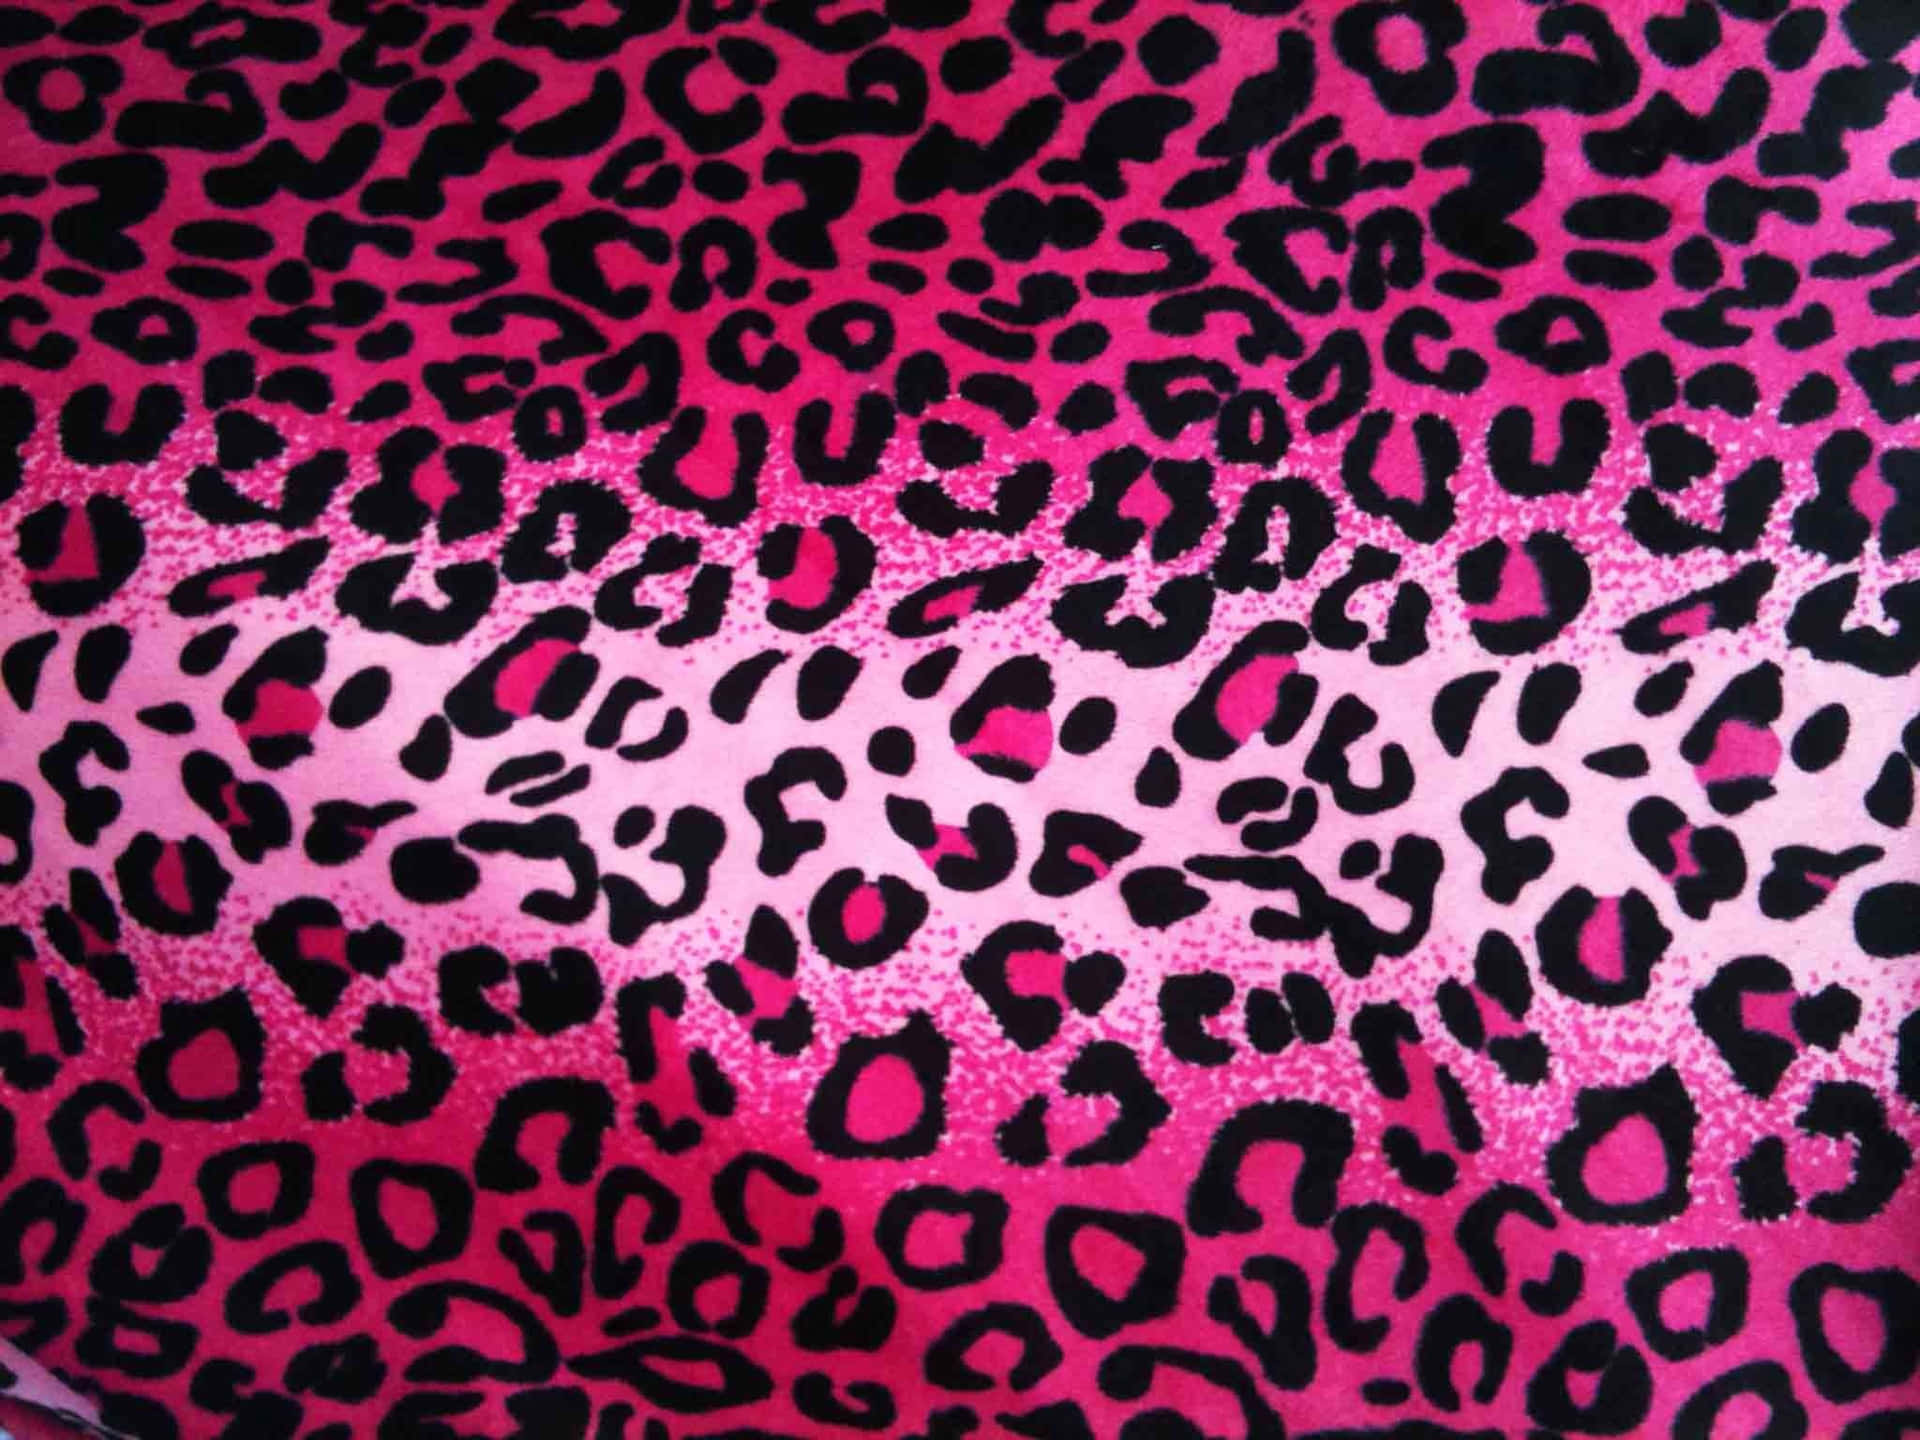 A Close Up Of A Pink Leopard Print Fabric